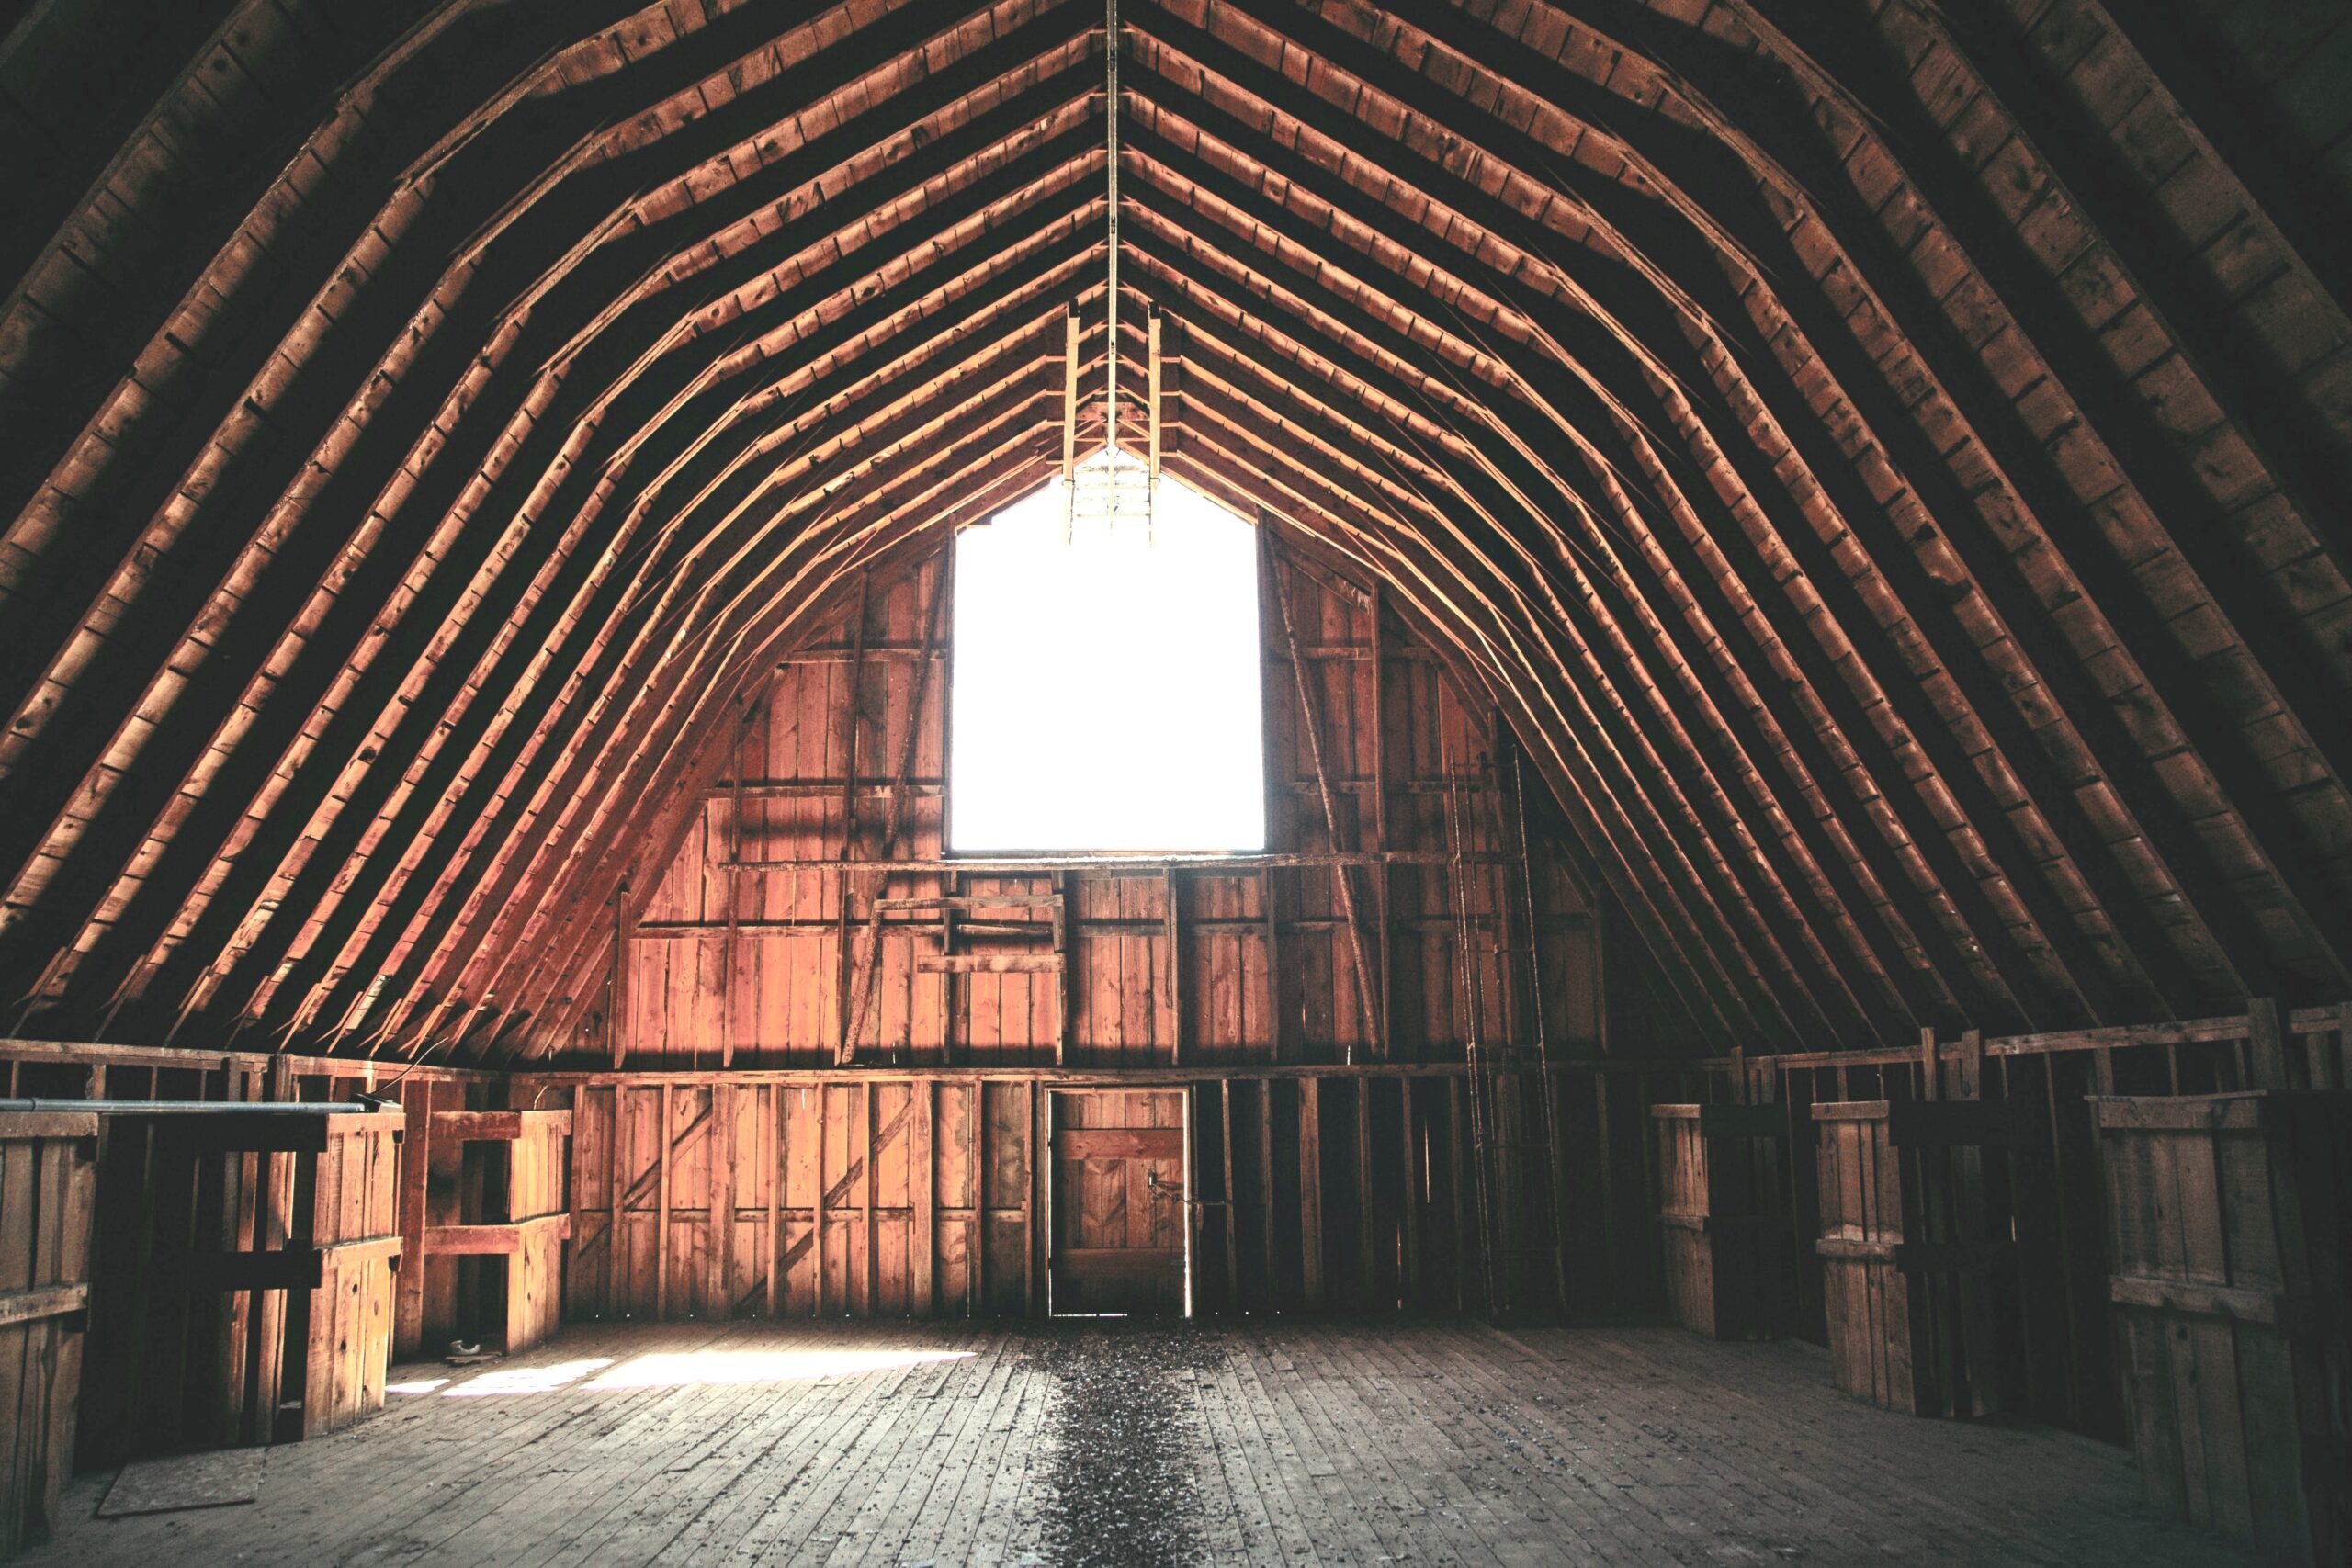 How To Rent A Barn For Storage:  Passive Income On The Farm, An Interview With Allison Sue